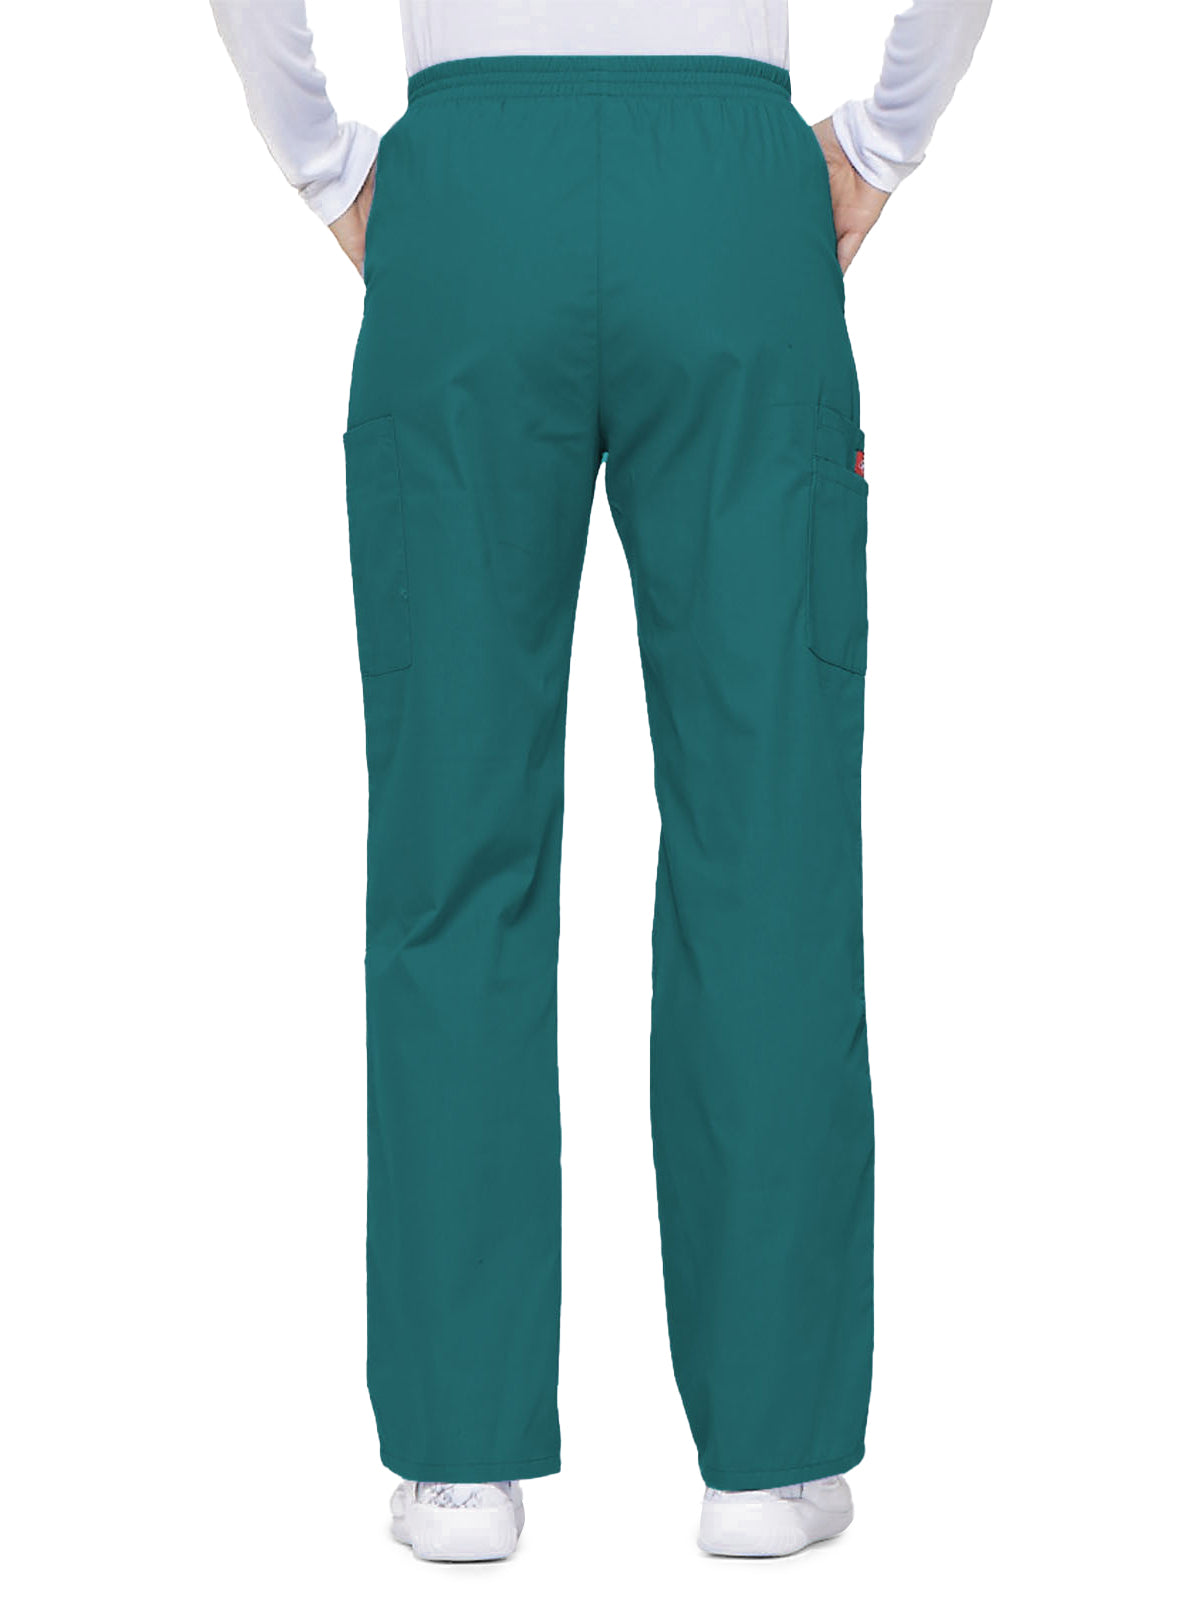 Women's Natural Rise Tapered Leg Pull-On Pant - 86106 - Teal Blue